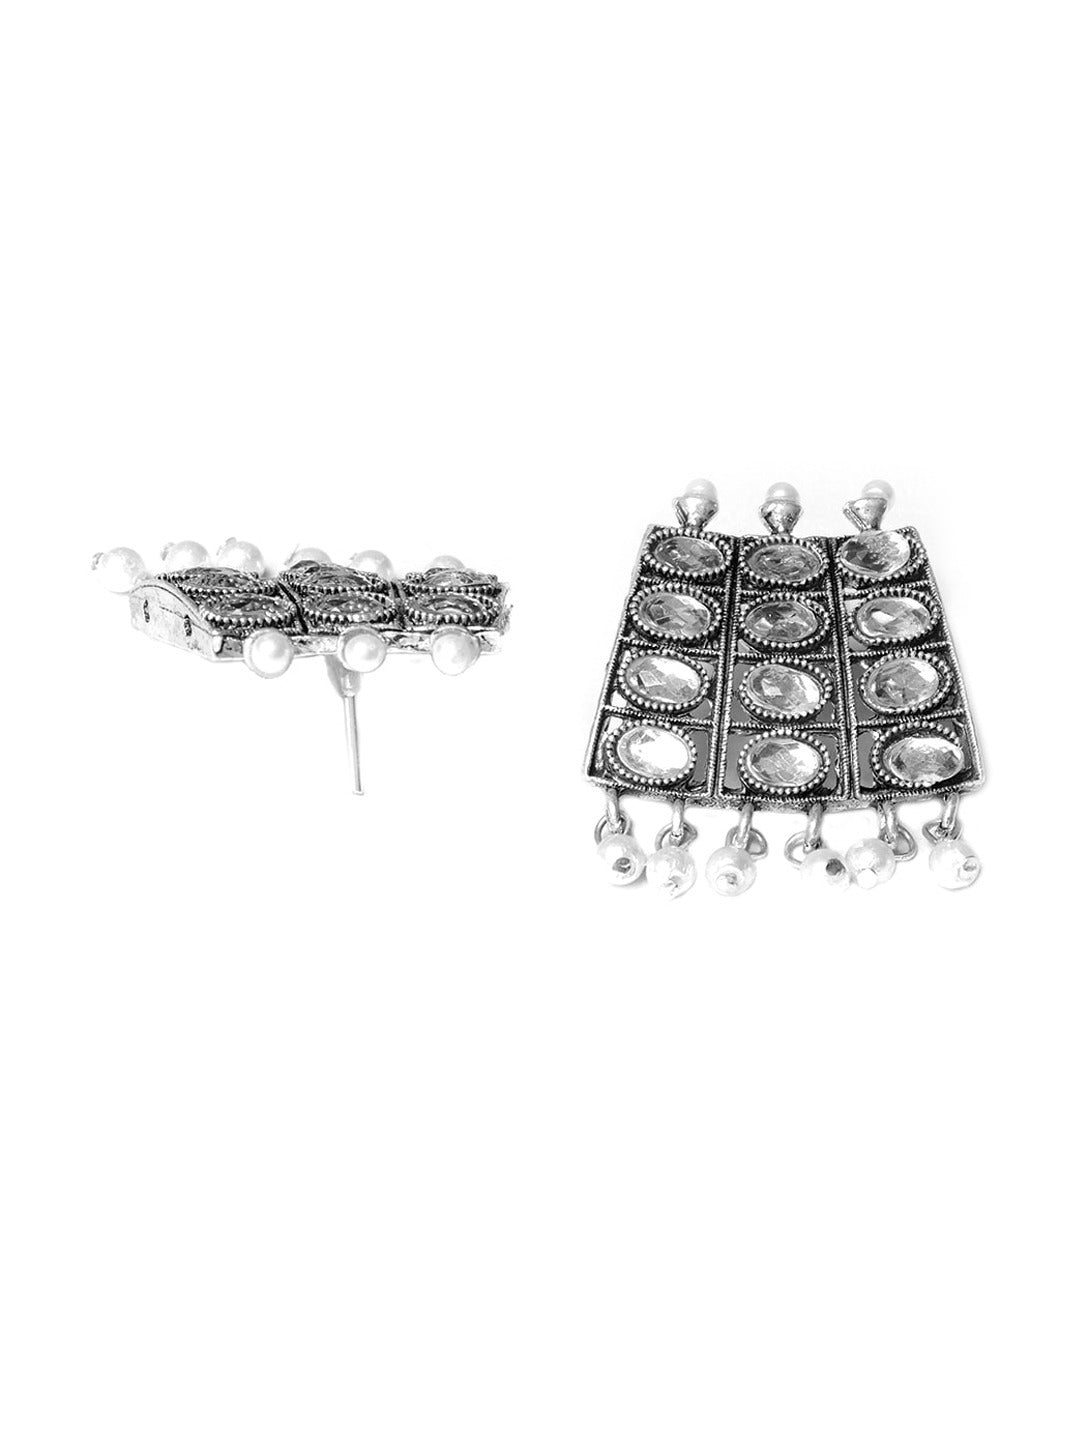 Women's Silver-Plated White Stone-Studded Jewellery Set - Morkanth